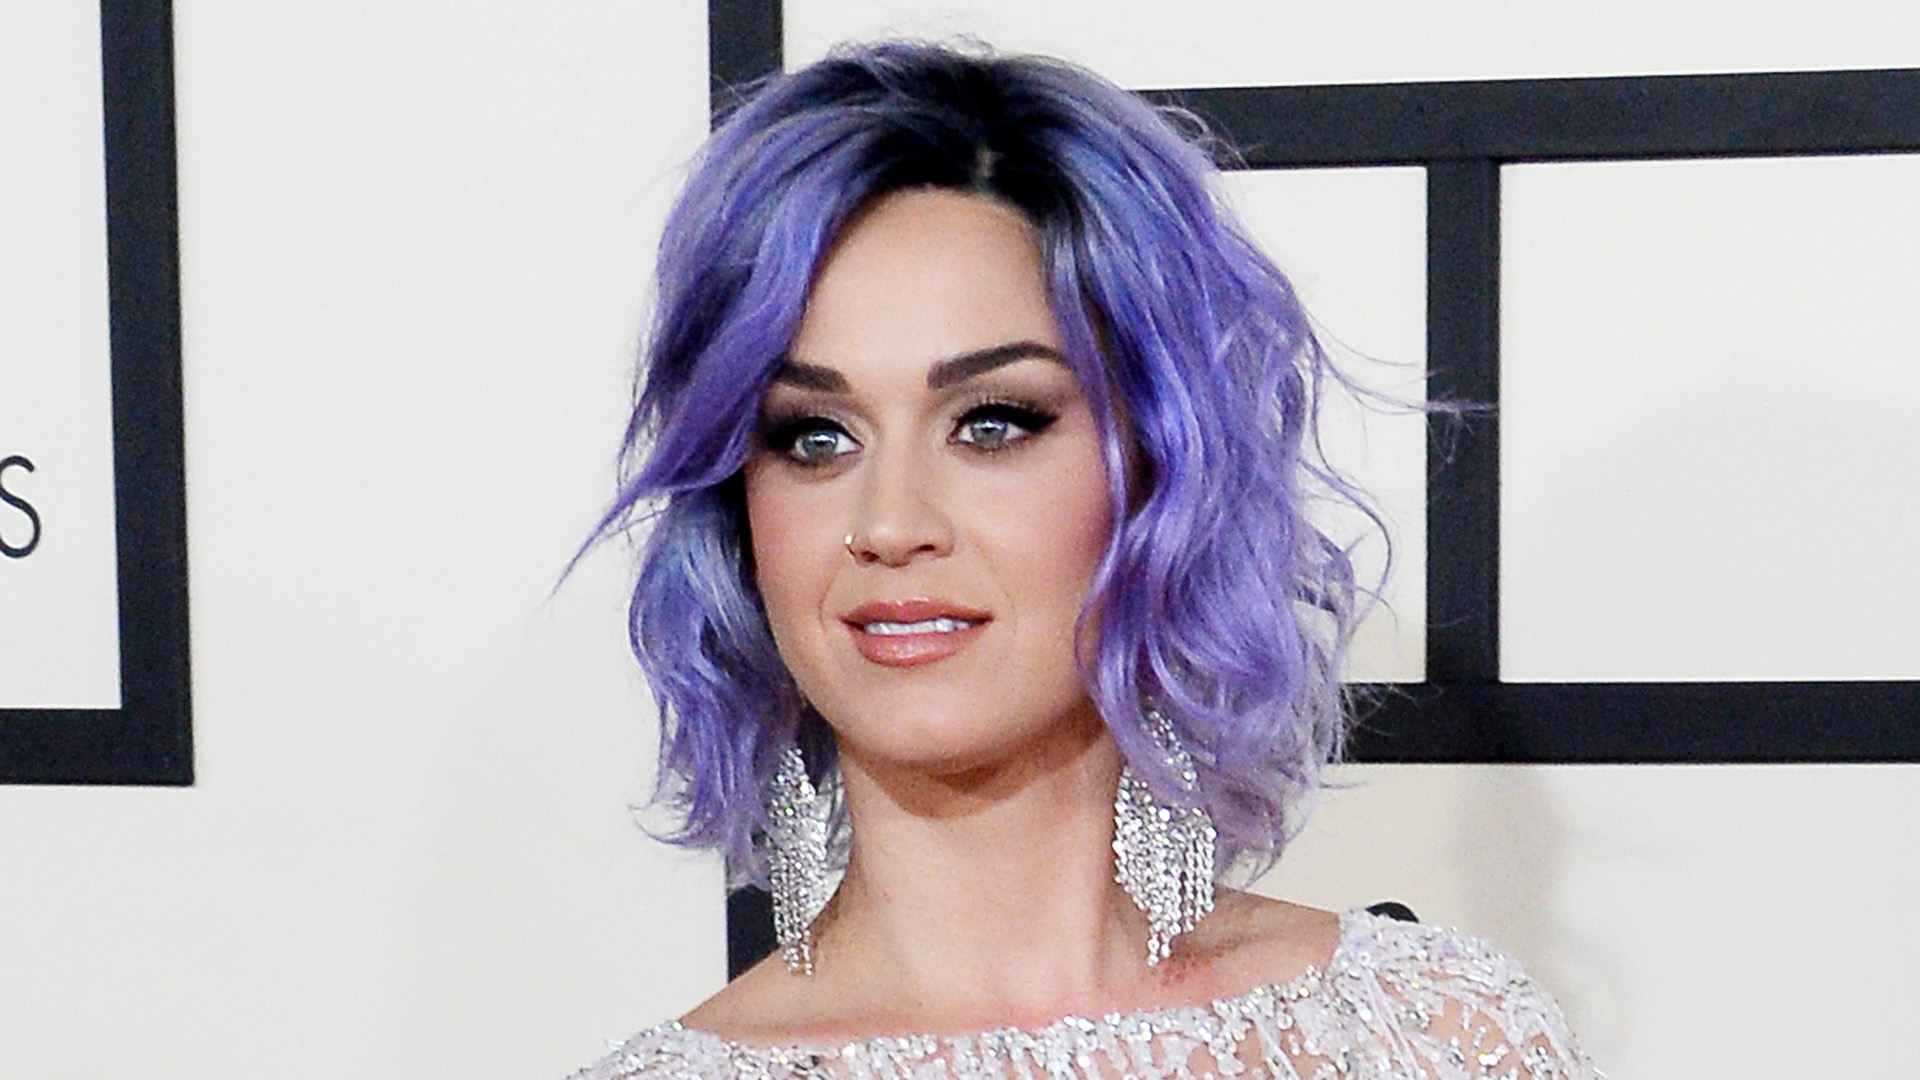 From Blue to Green: 6 Celebrity Hair Transformations That Will Make Your Jaw Drop